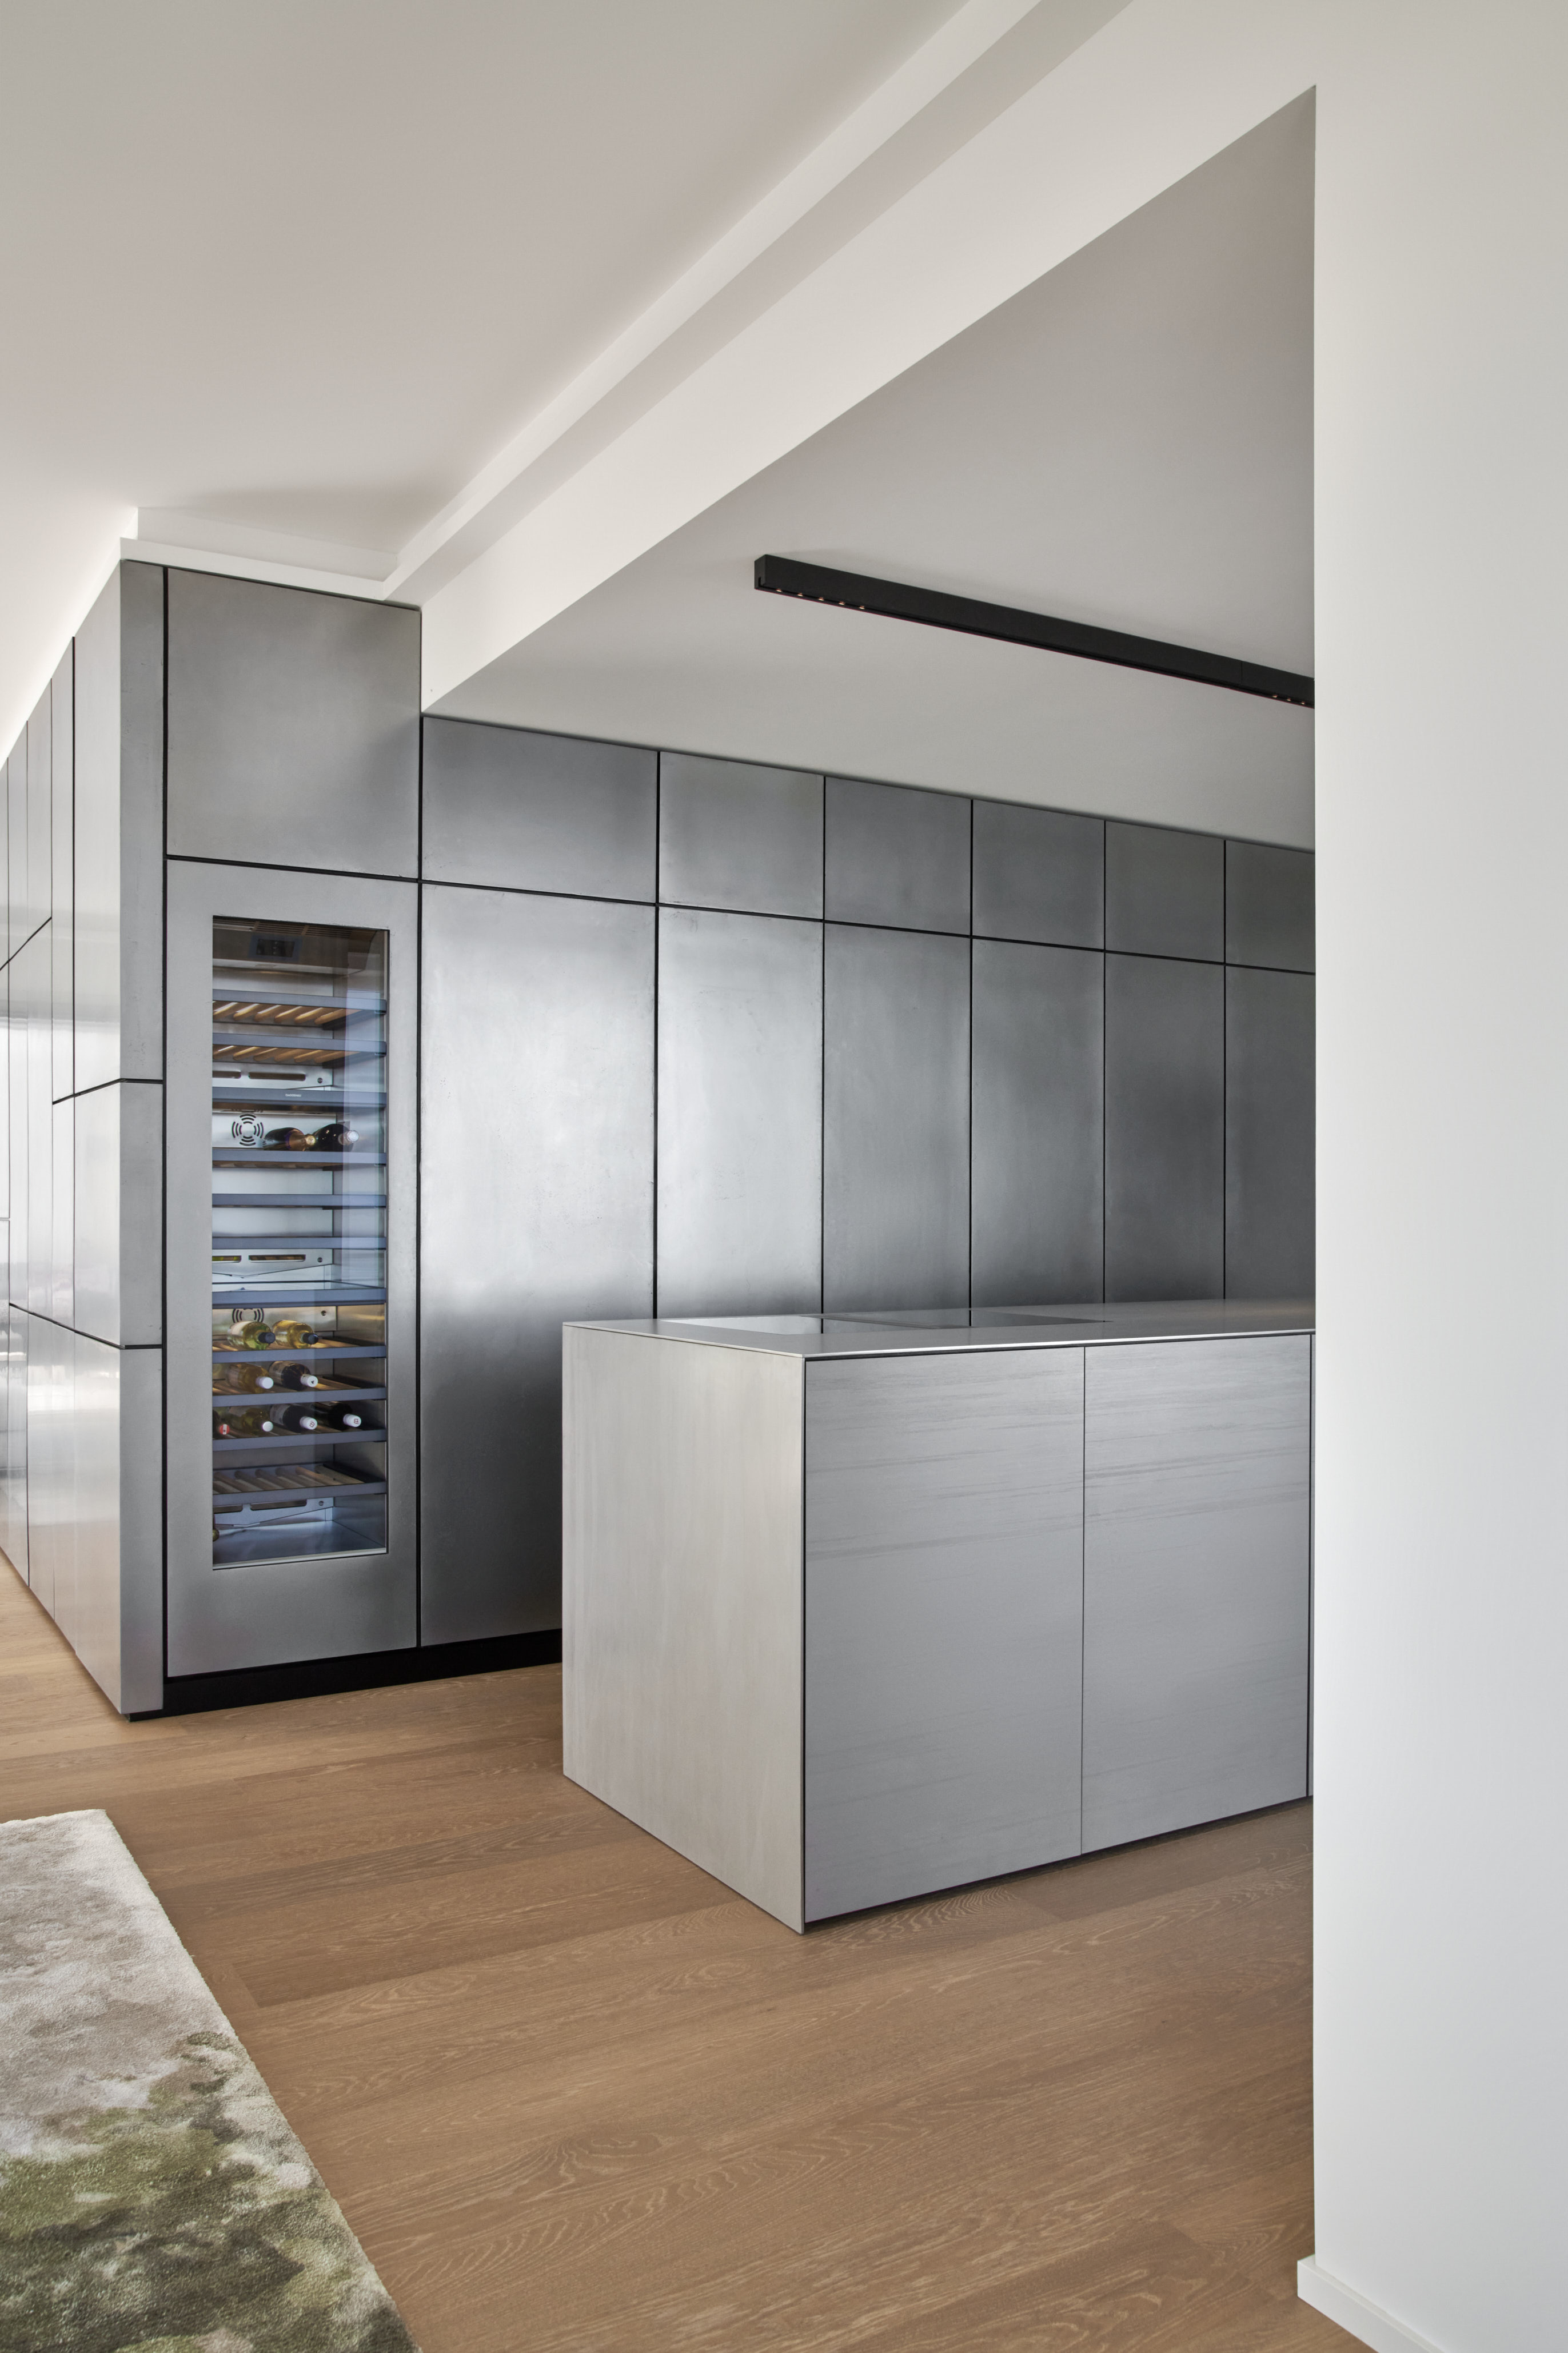 Midas Metall Lack Surface Arbon Lake Constance Bodensee Penthouse kitchen counter stainless steel Gaggenau